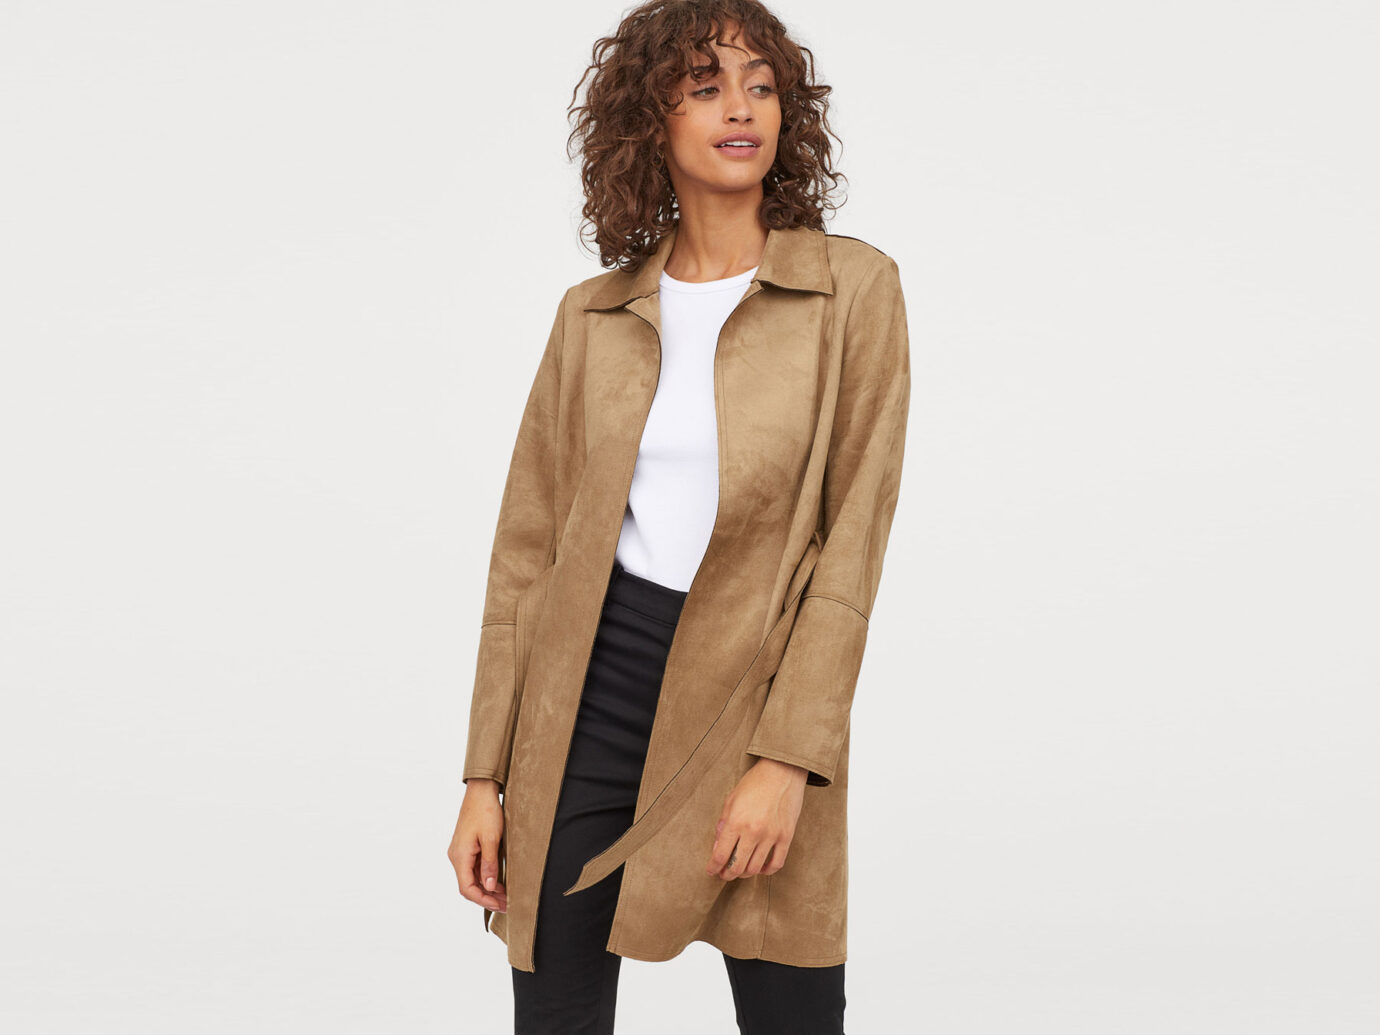 Shop the Best Suede Jackets: Tan, Black, Gray, and More | Jetsetter